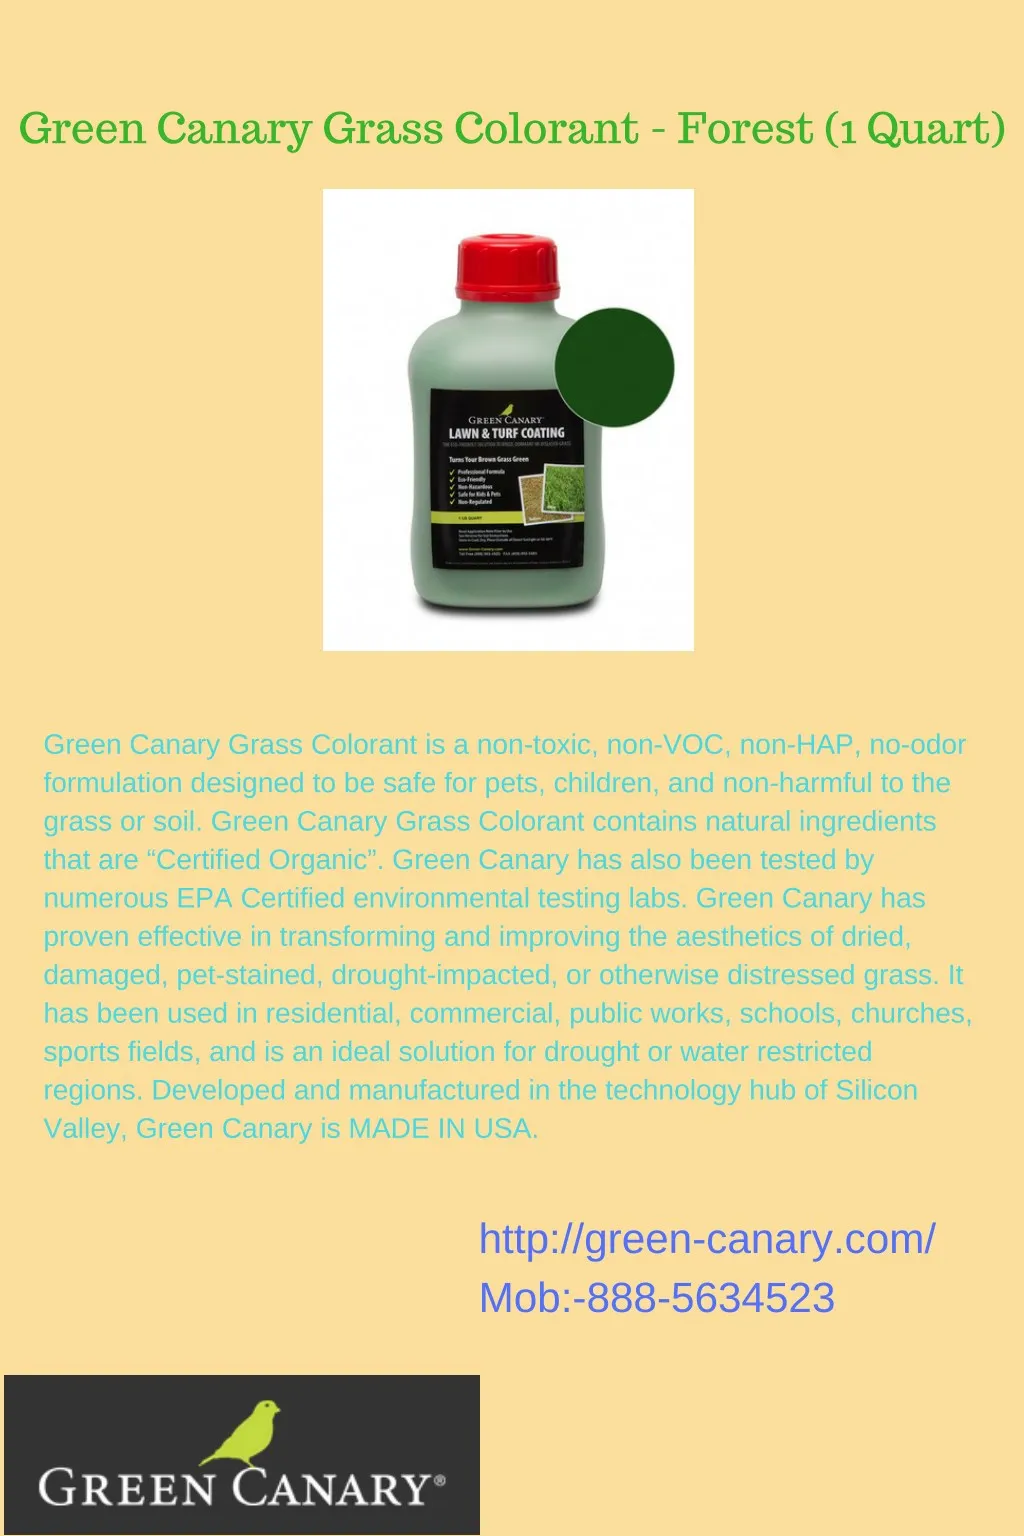 green canary grass colorant forest 1 quart